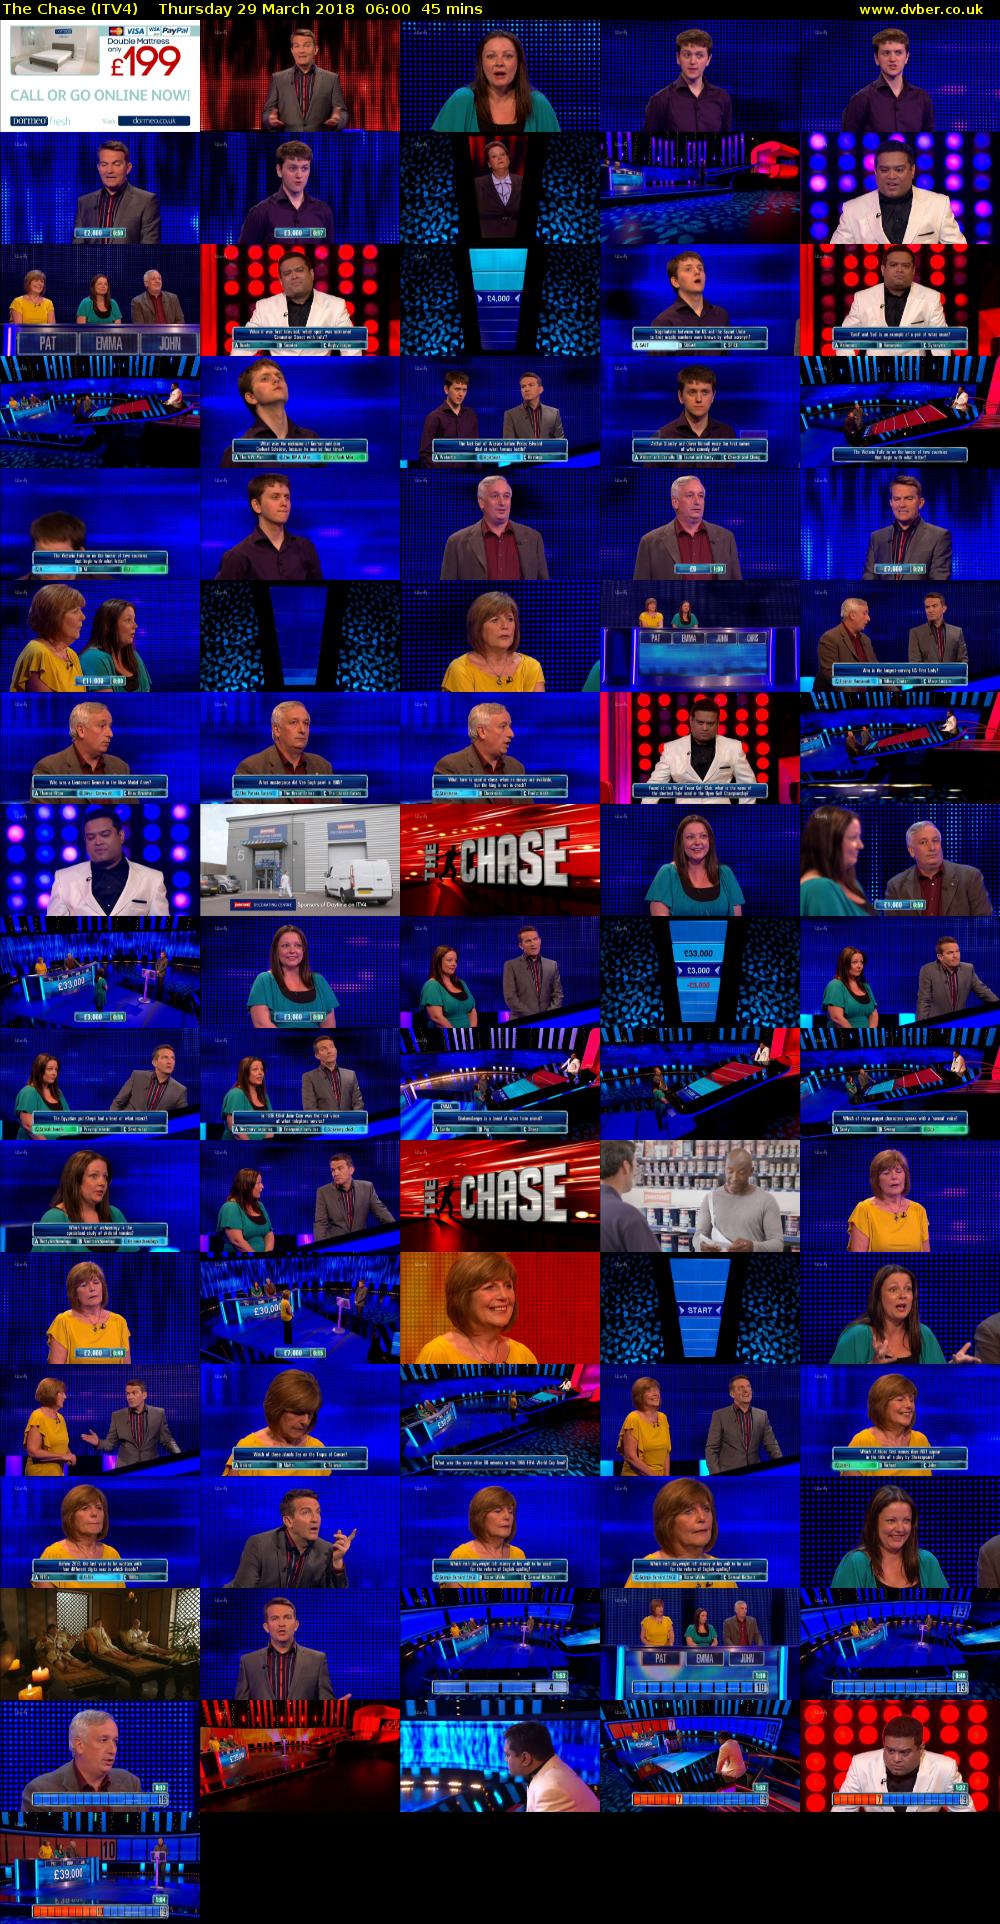 The Chase (ITV4) Thursday 29 March 2018 06:00 - 06:45